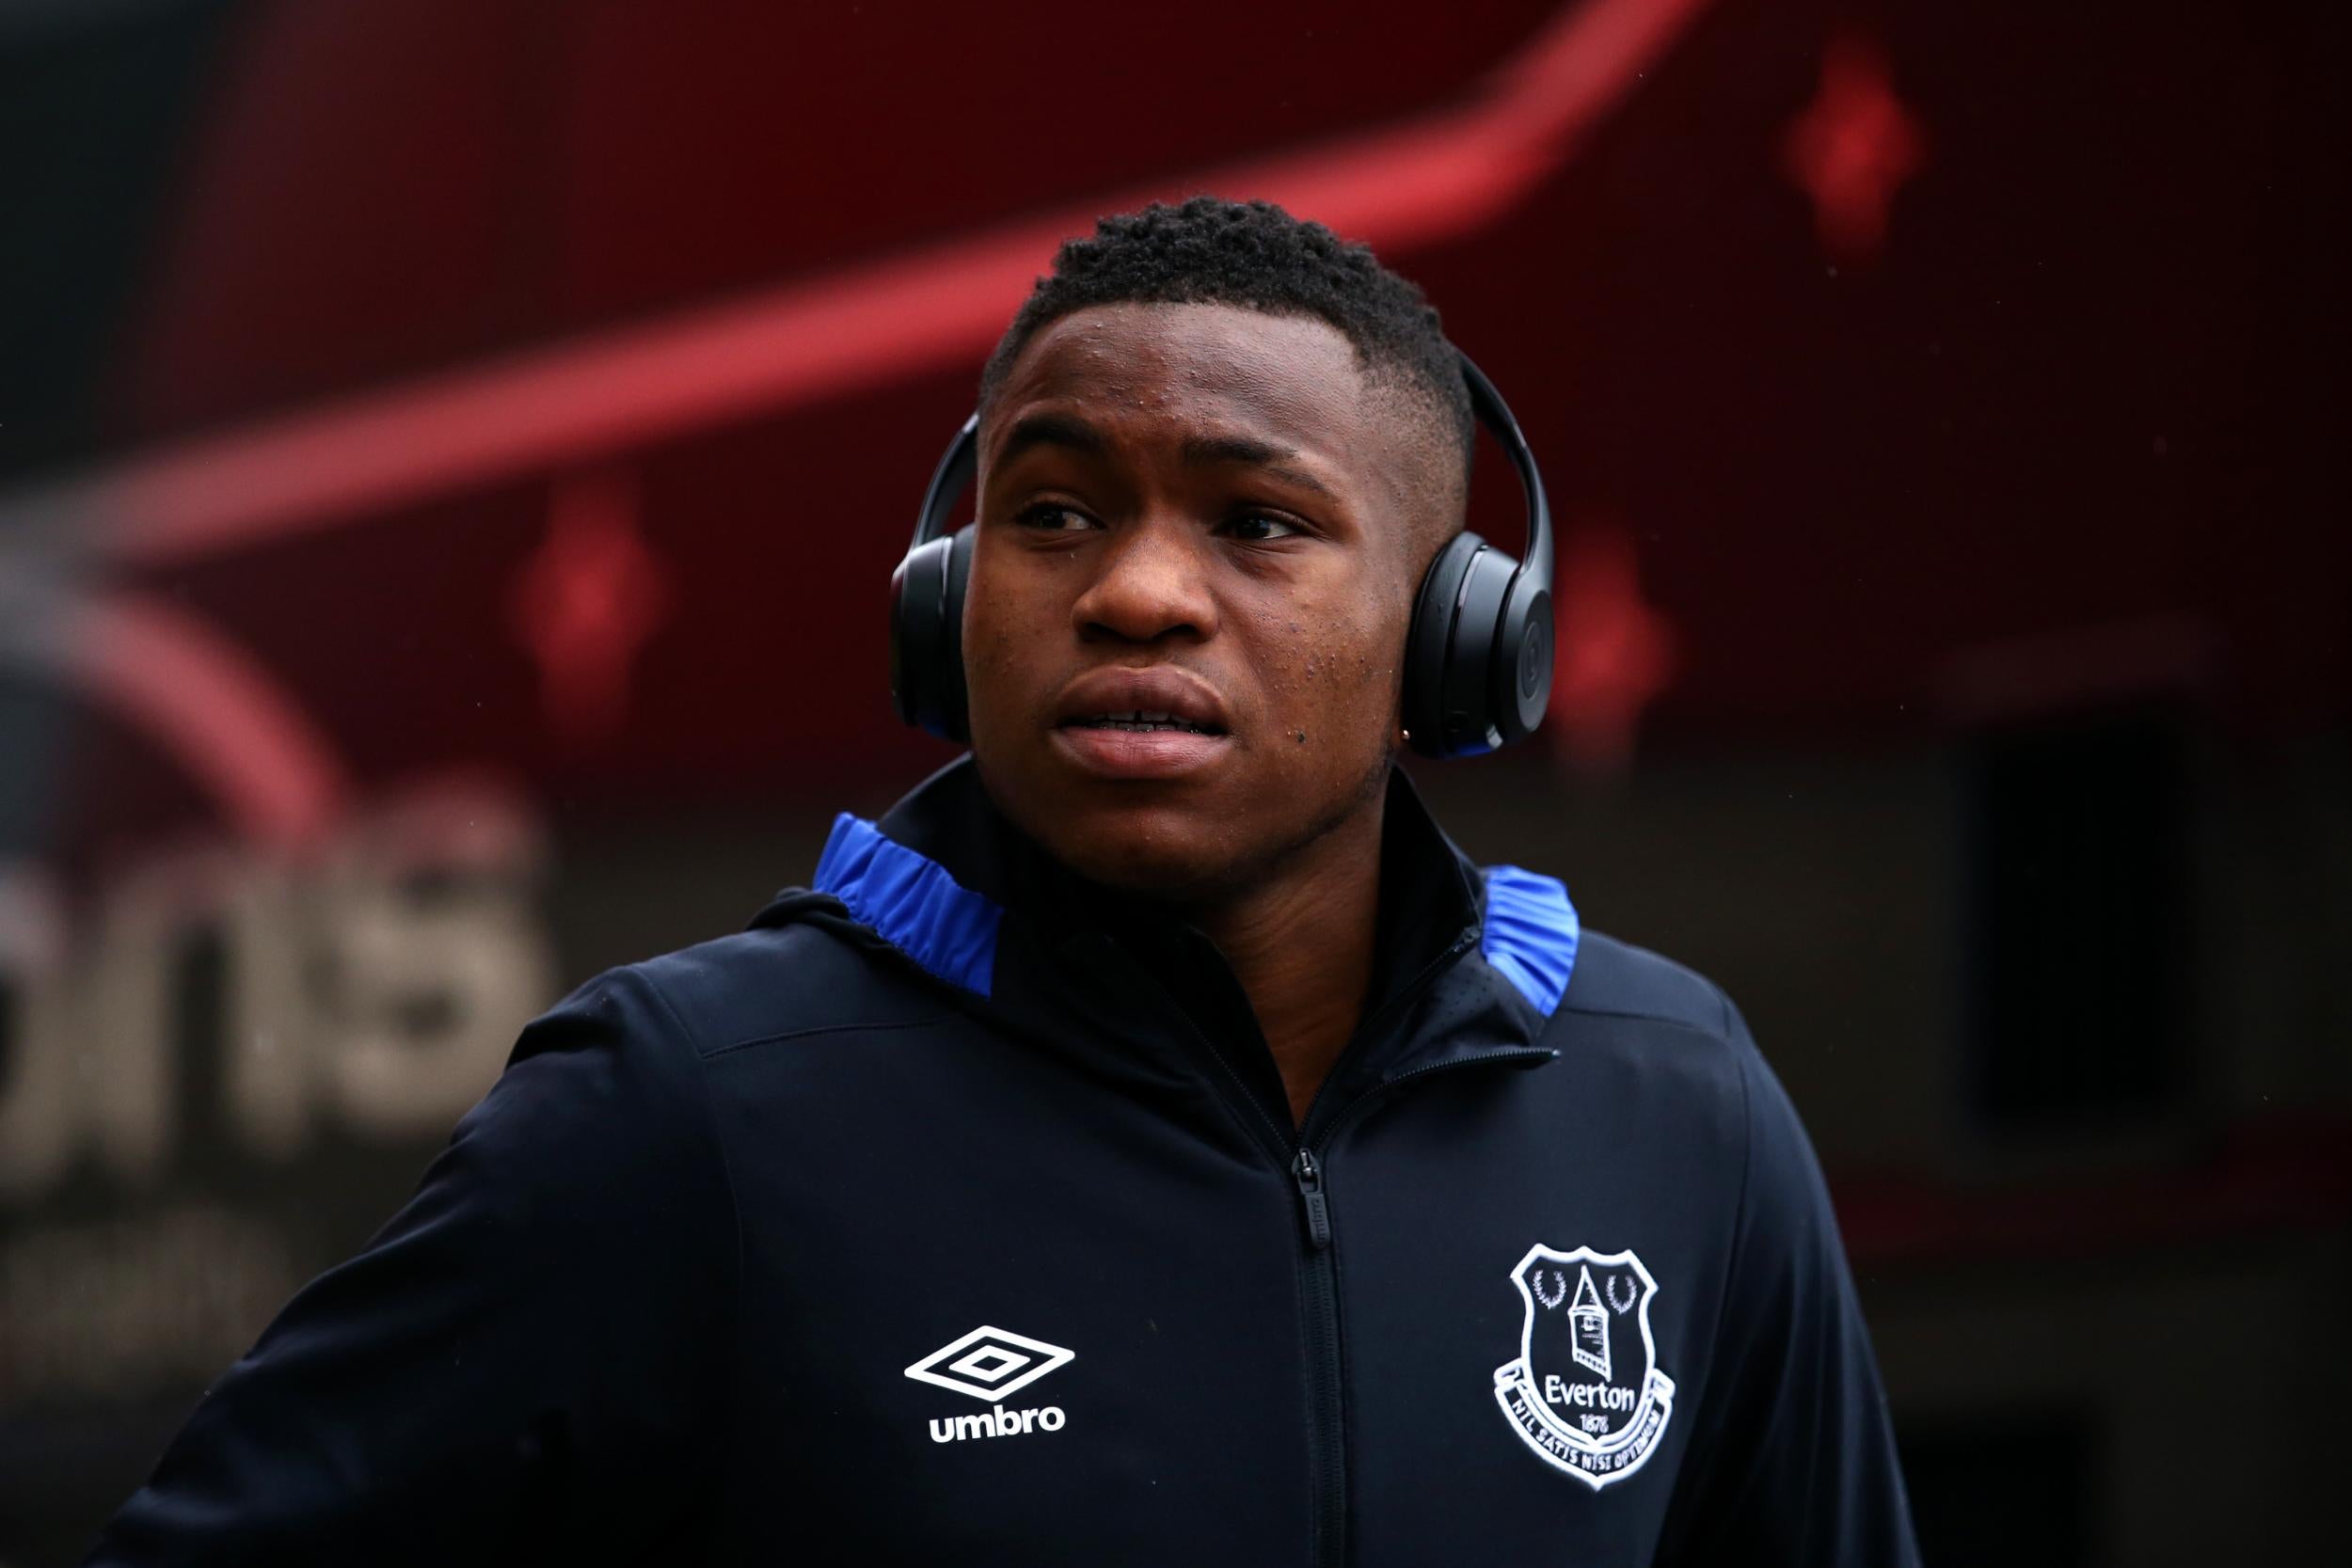 Ademola Lookman joined Everton in January for a fee of £11m